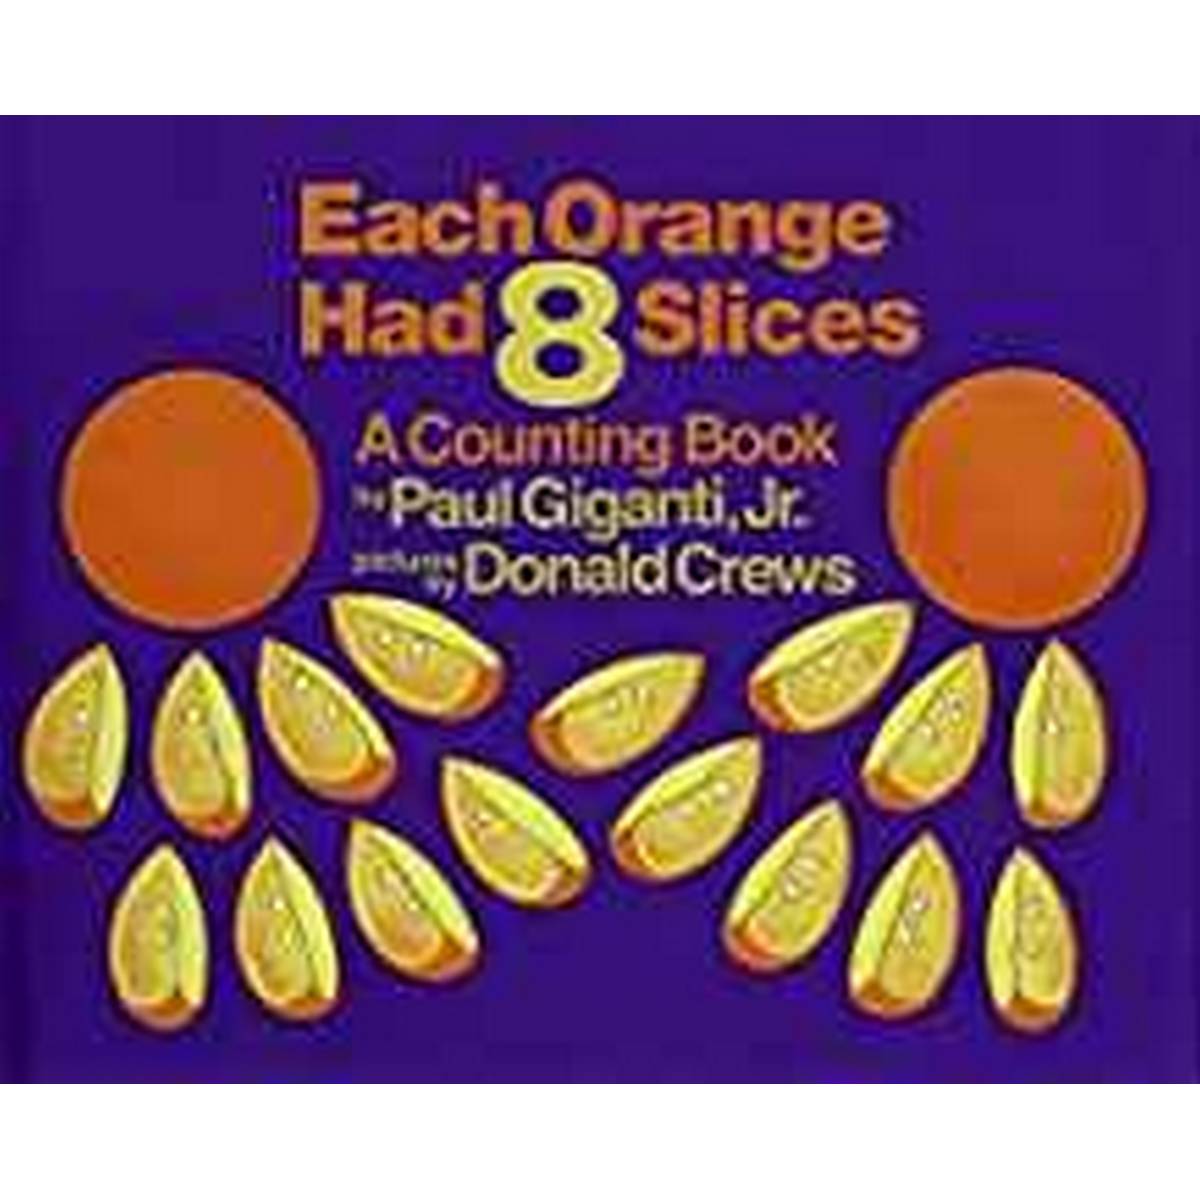 Each Orange Had 8 Slices (Counting Book)